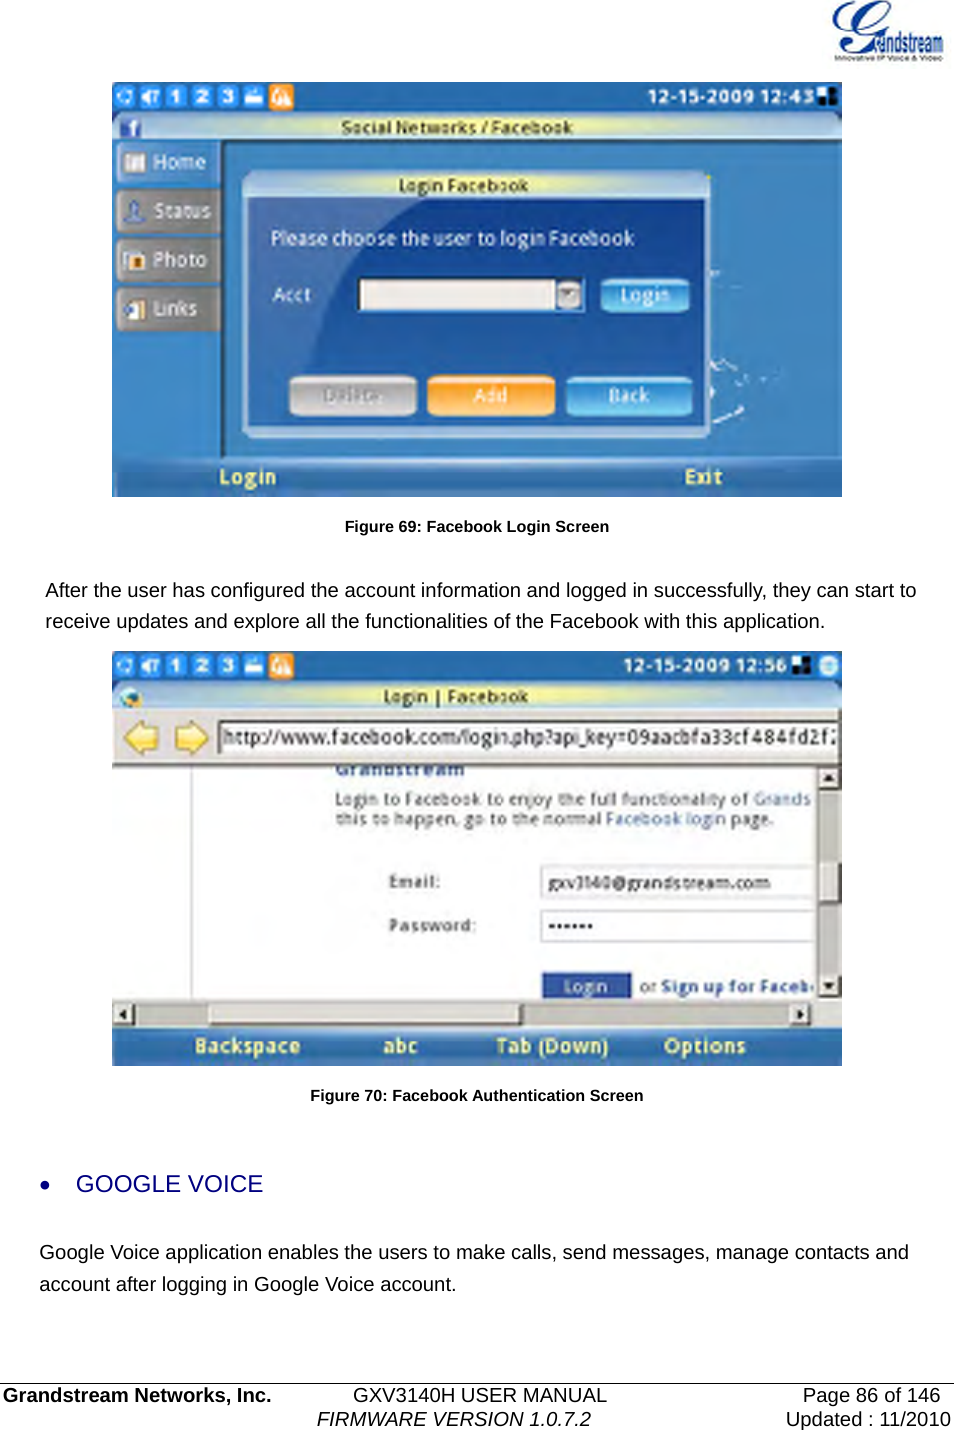   Grandstream Networks, Inc.        GXV3140H USER MANUAL                  Page 86 of 146                                FIRMWARE VERSION 1.0.7.2 Updated : 11/2010   Figure 69: Facebook Login Screen  After the user has configured the account information and logged in successfully, they can start to receive updates and explore all the functionalities of the Facebook with this application.  Figure 70: Facebook Authentication Screen  • GOOGLE VOICE Google Voice application enables the users to make calls, send messages, manage contacts and account after logging in Google Voice account.    